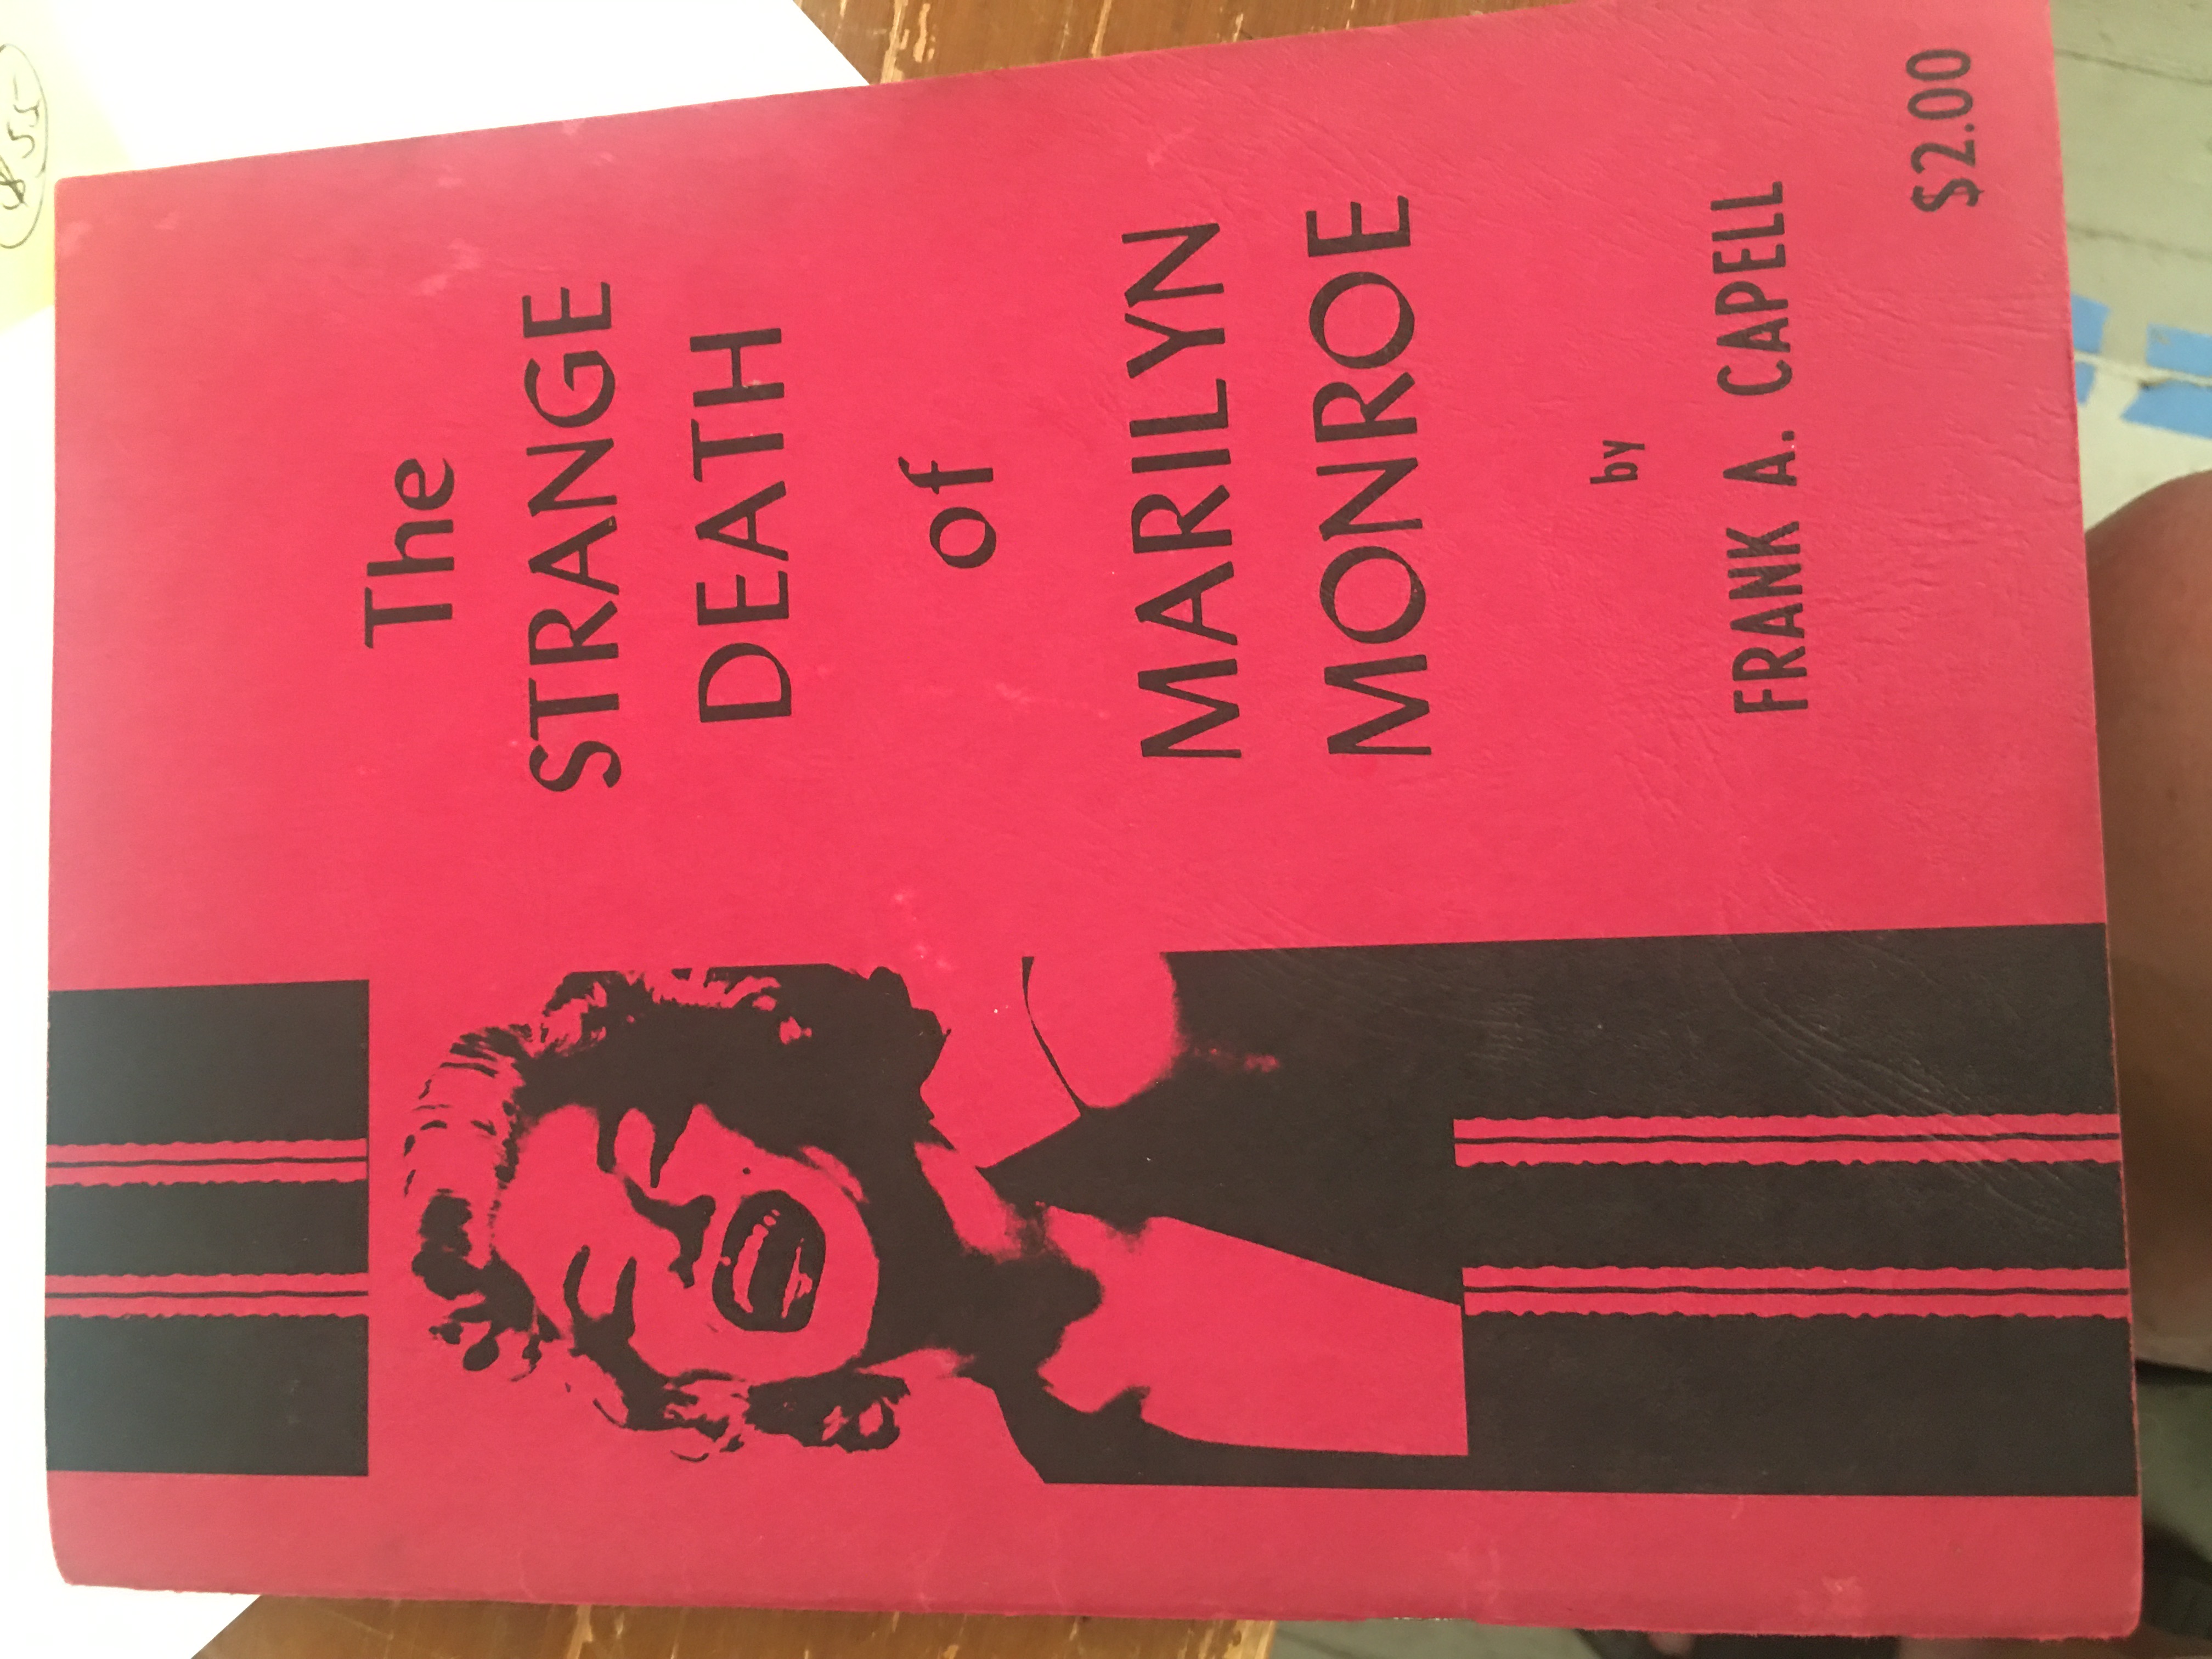 The Strange Death of Marilyn Monroe. 1964. Paper.: Capell, Frank A:  : Books